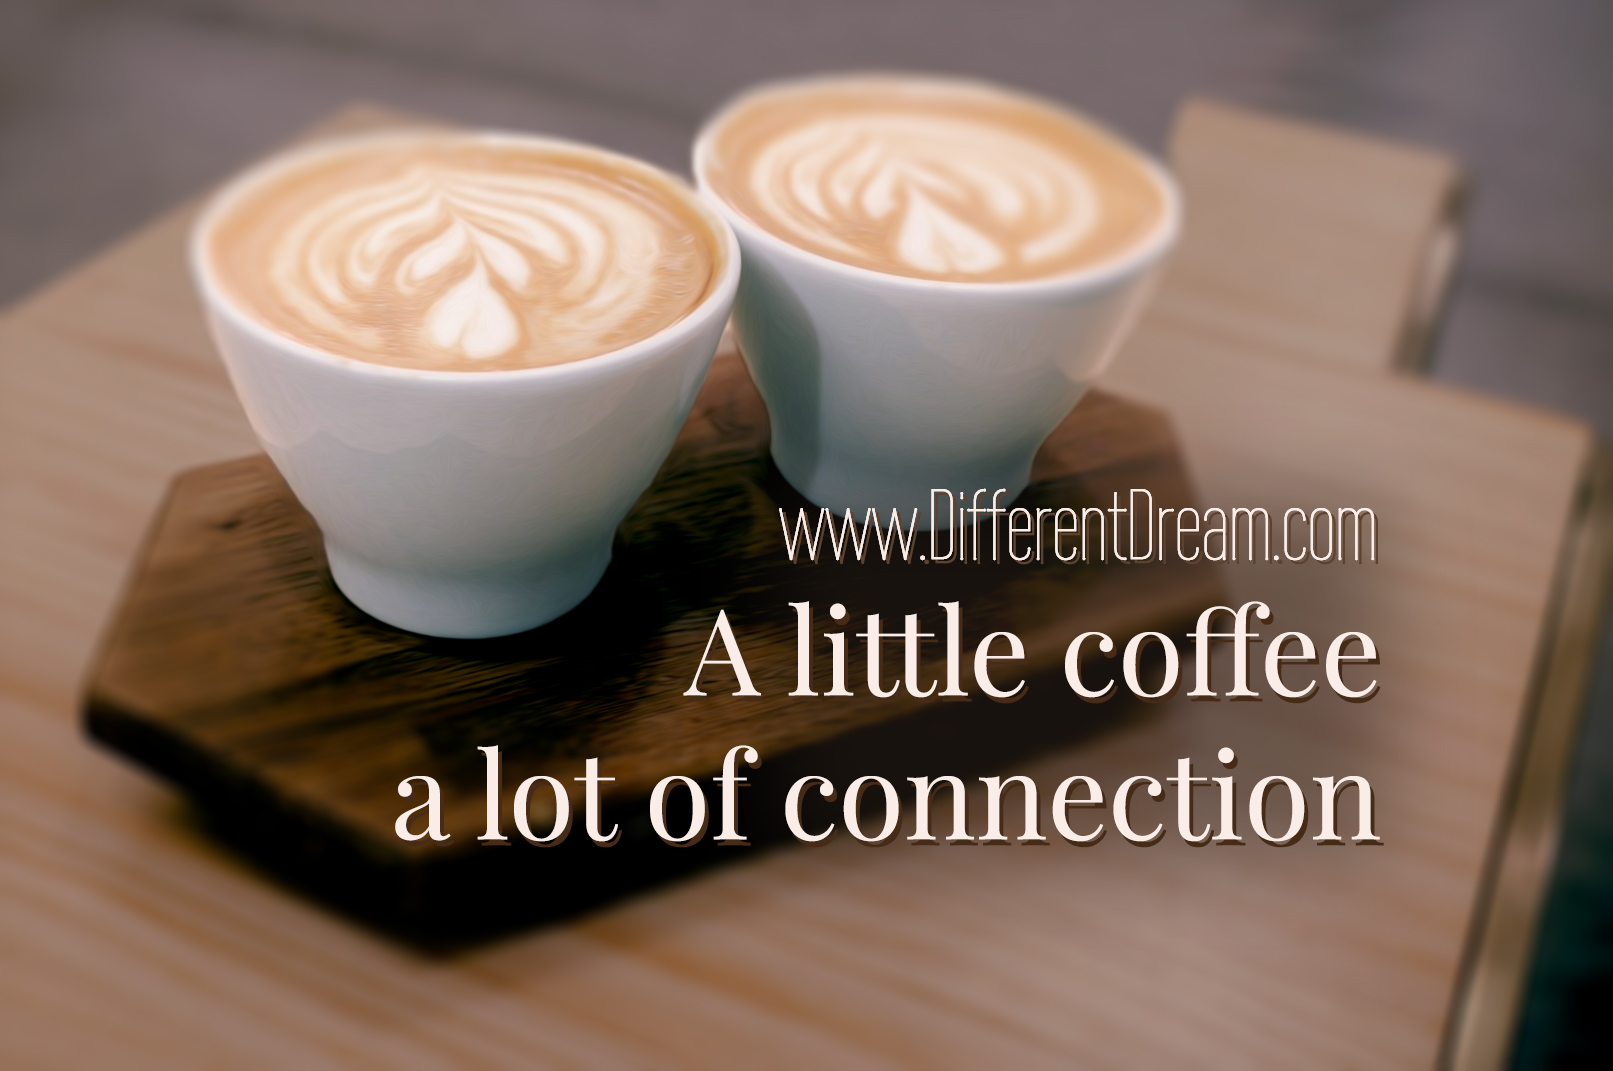 Guest blogger Karen Wright explains how the phrase "I'd like to buy you coffee" has been her go-to for initiating friendship.